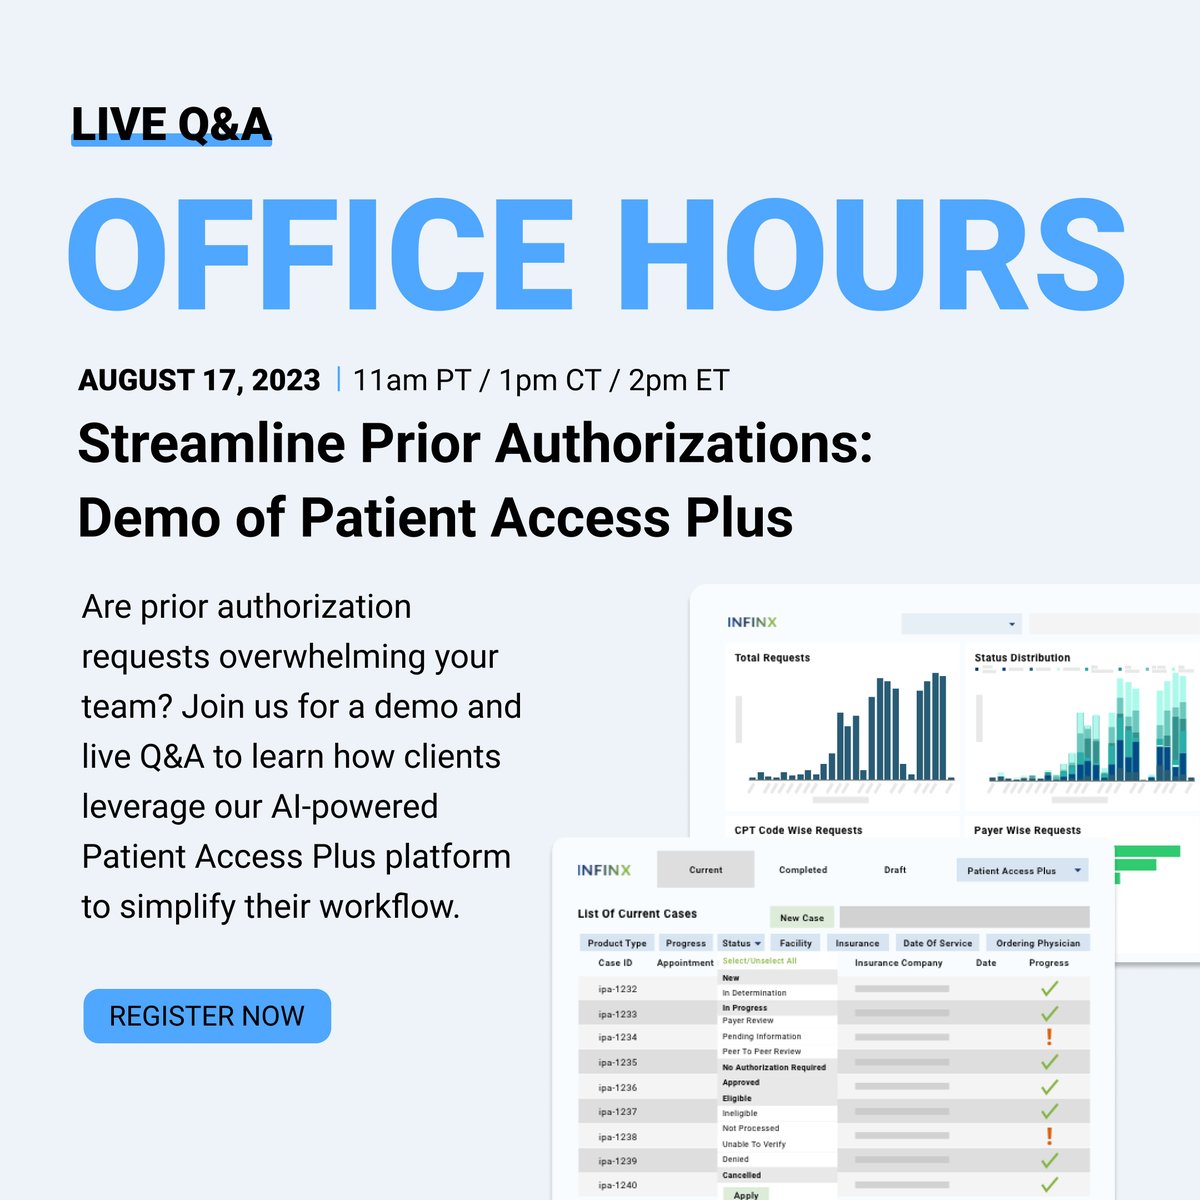 Drowning in the complexities of prior authorization requests? We get it. This week, get a firsthand look at our Patient Access Plus platform on August 17th at 11am PT.

Register to attend: hubs.li/Q01_6PxH0

#PatientAccessPlusDemo #InfinxOfficeHours #PriorAuthorization